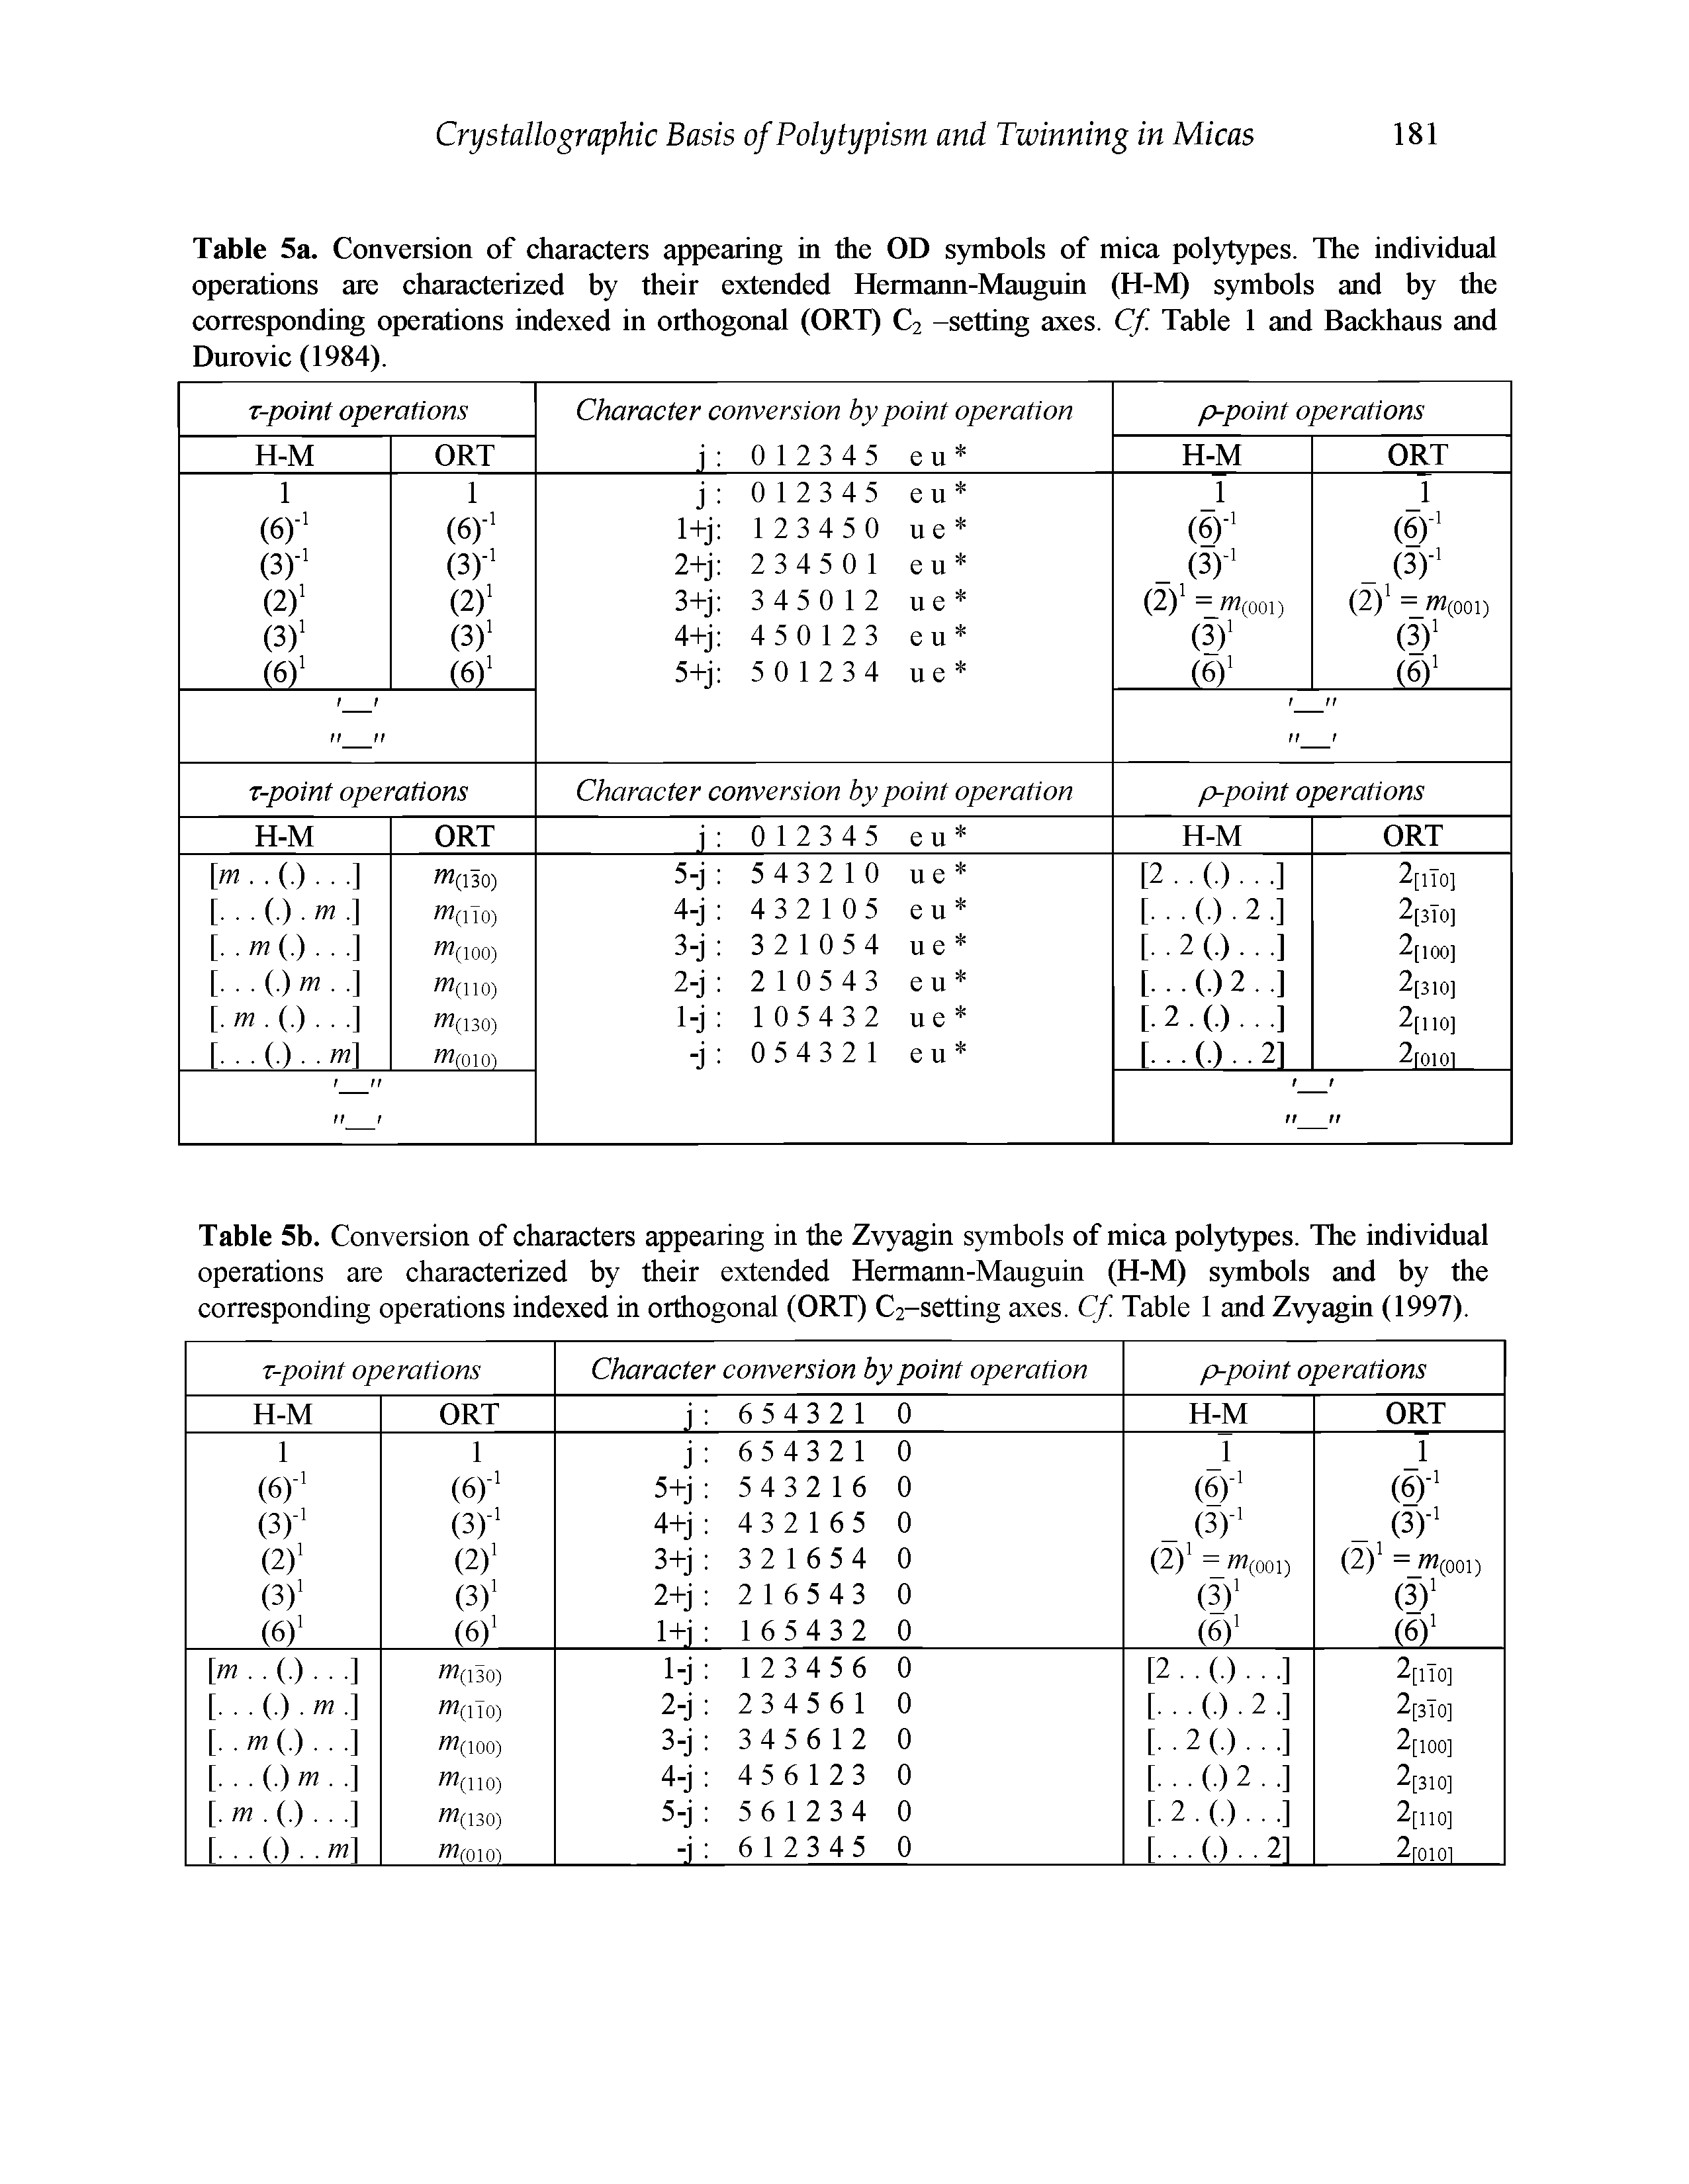 Table 5a. Conversion of characters appearing in the OD s nnbols of mica polytypes. The individual operations are characterized by their extended Hermann-Mauguin (H-M) symbols and by the corresponding operations indexed in orthogonal (ORT) C2 -setting axes. Cf. Table 1 and Backhaus and Durovic (1984).